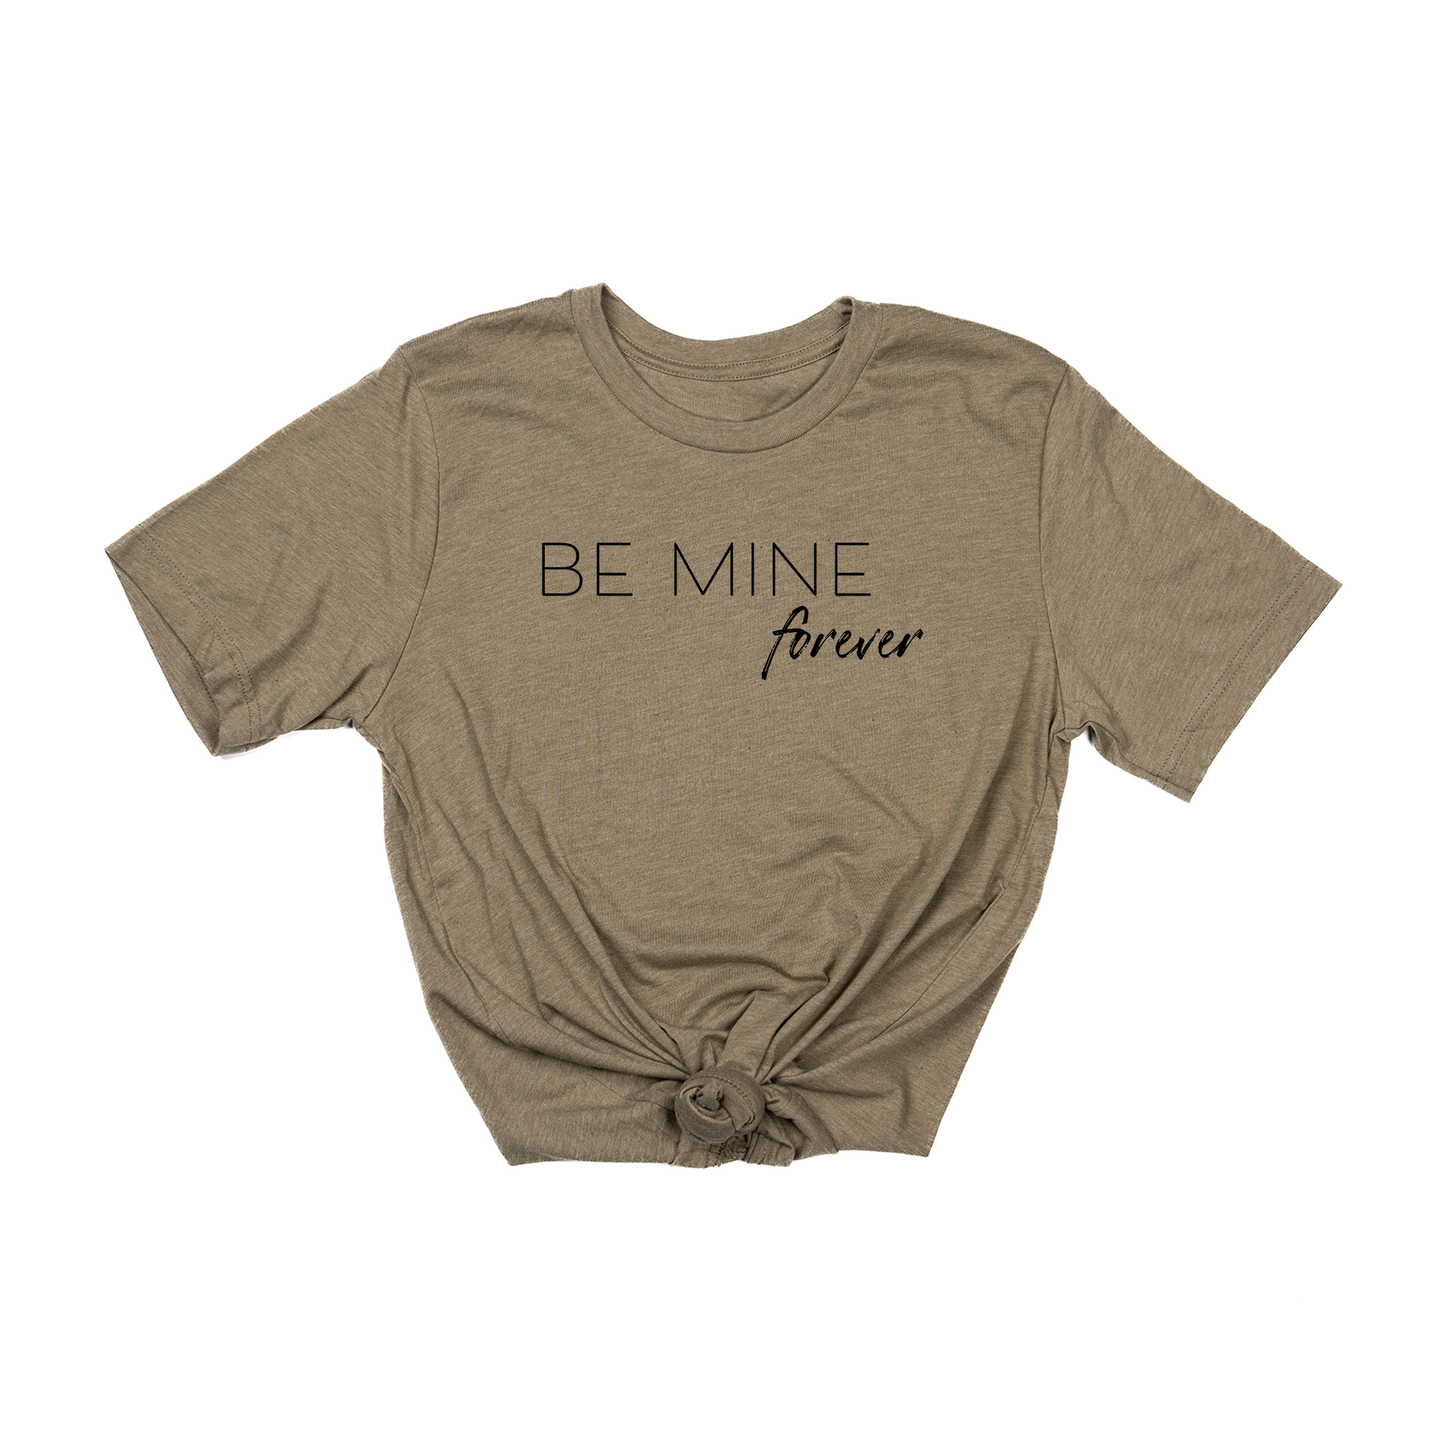 Be Mine Forever - Tee (Olive)